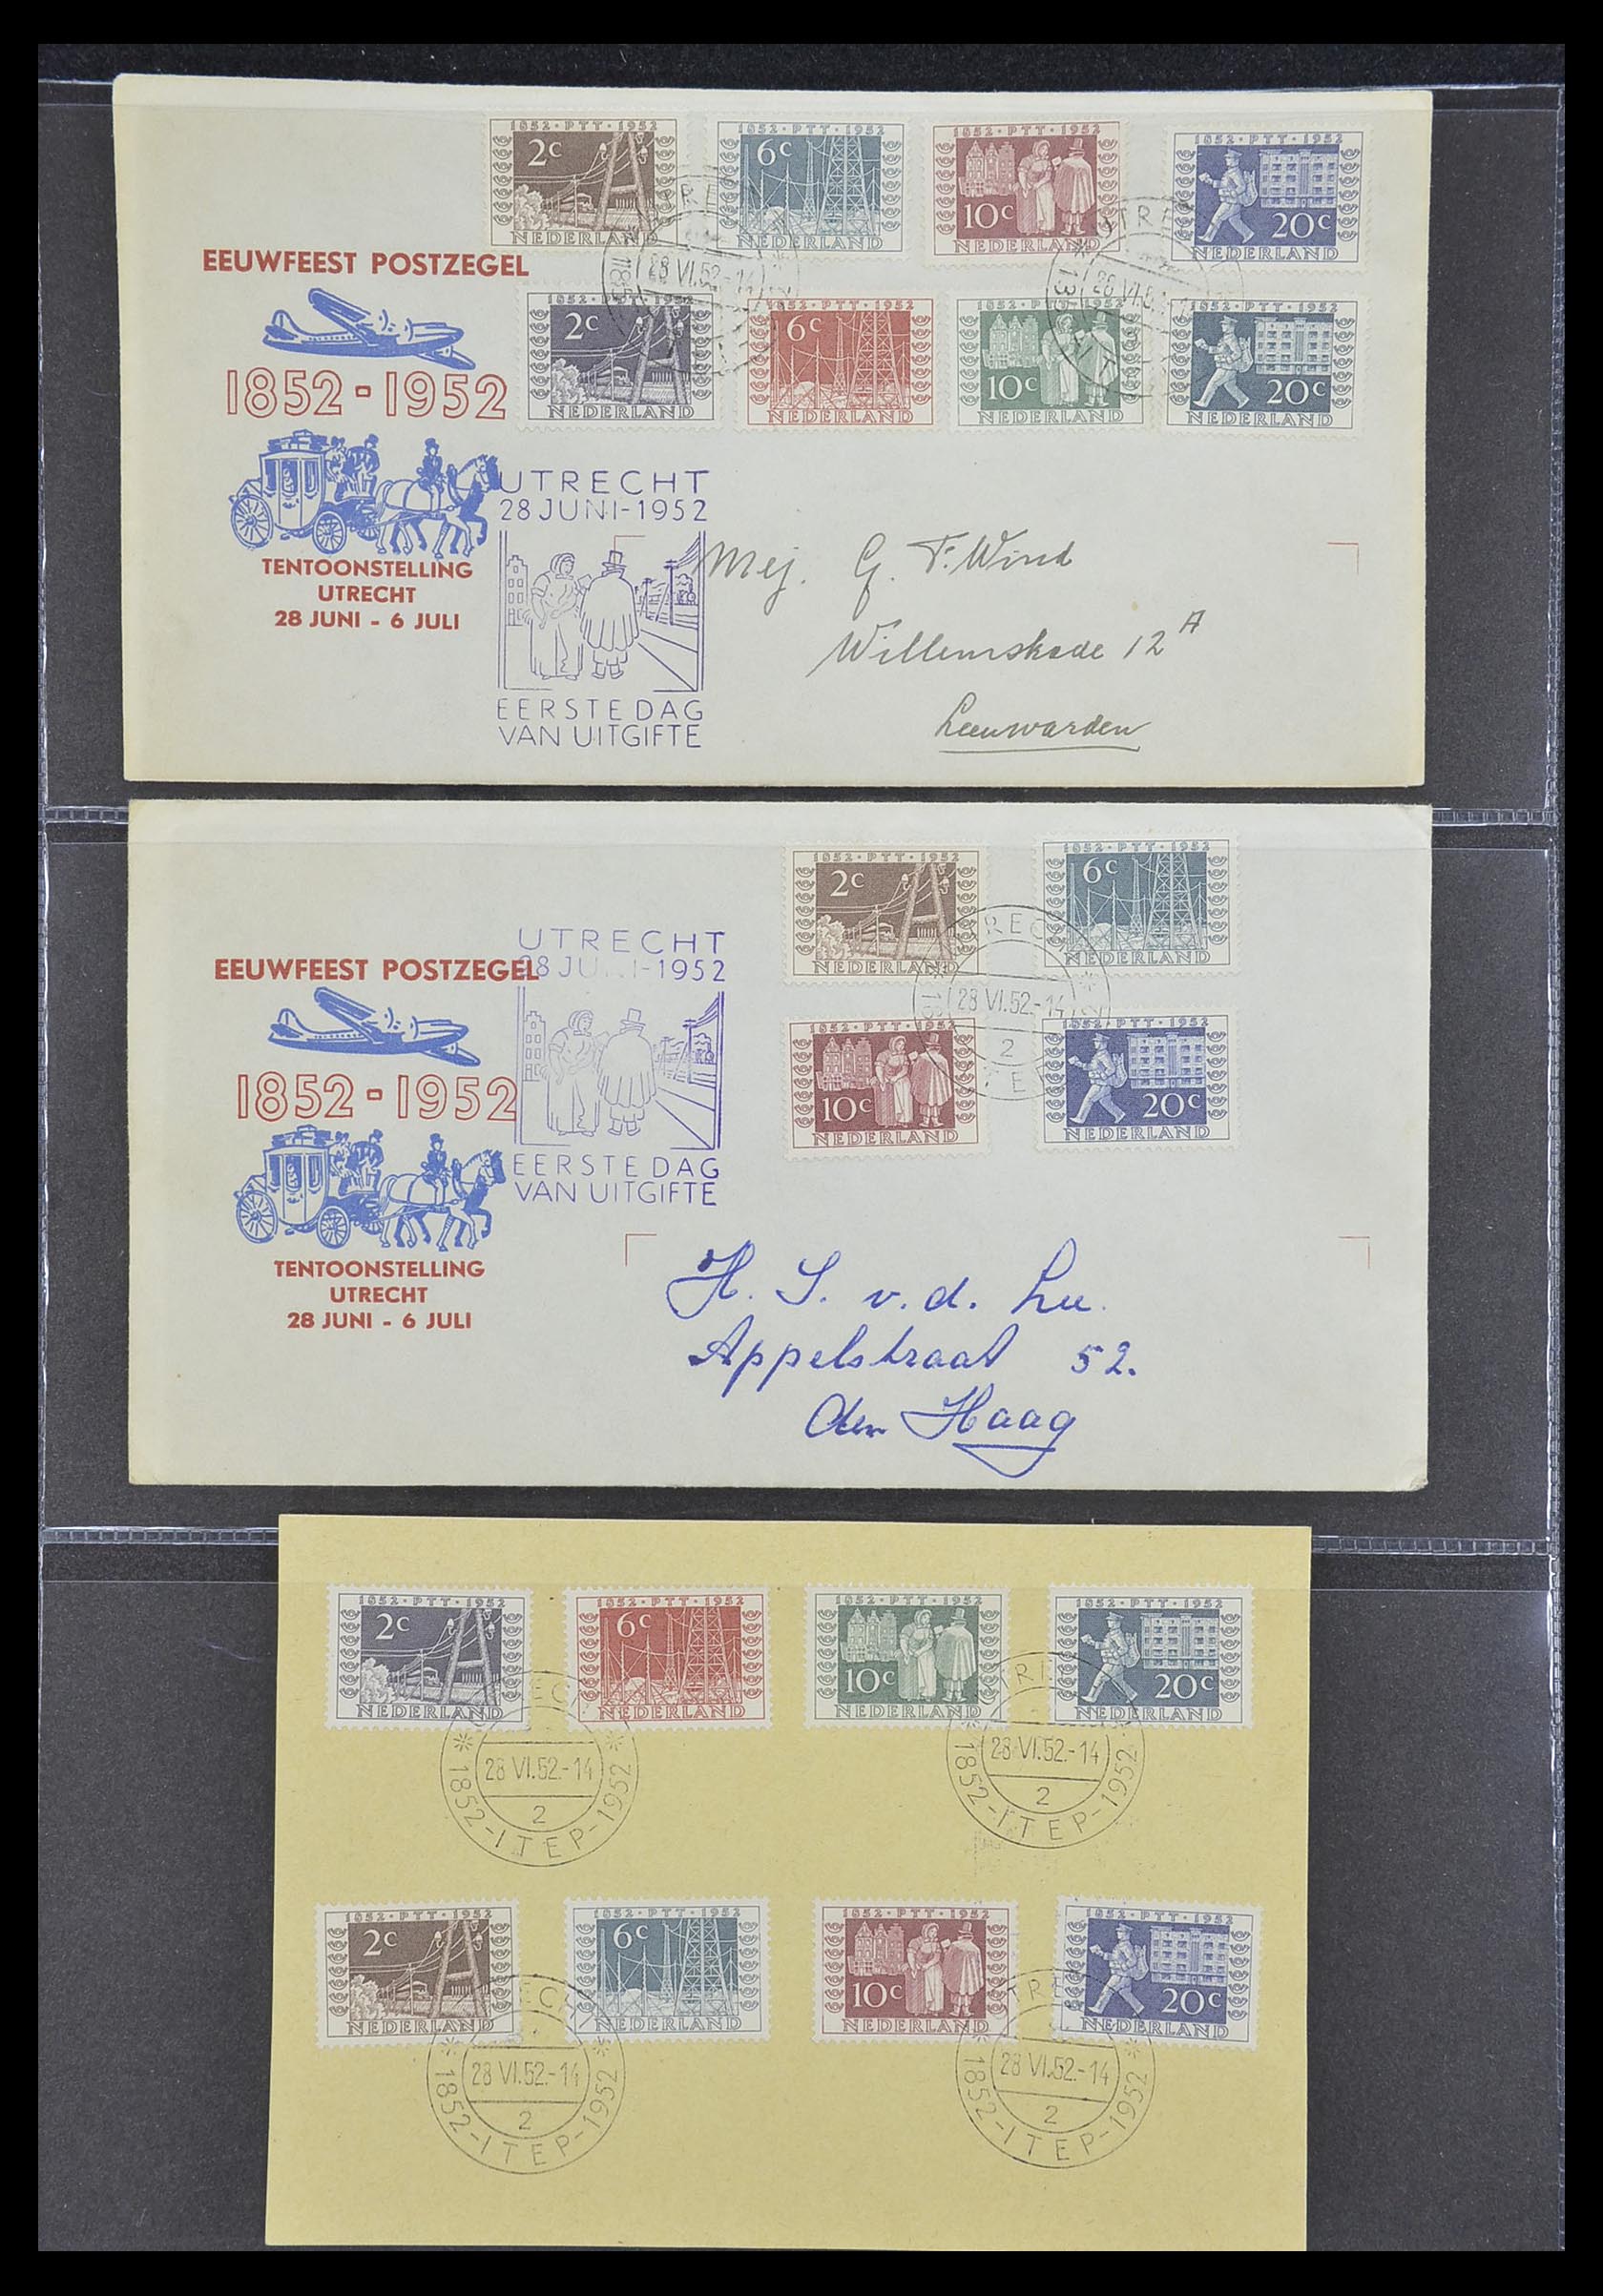 33330 057 - Stamp collection 33330 Netherlands covers 1852-1959.